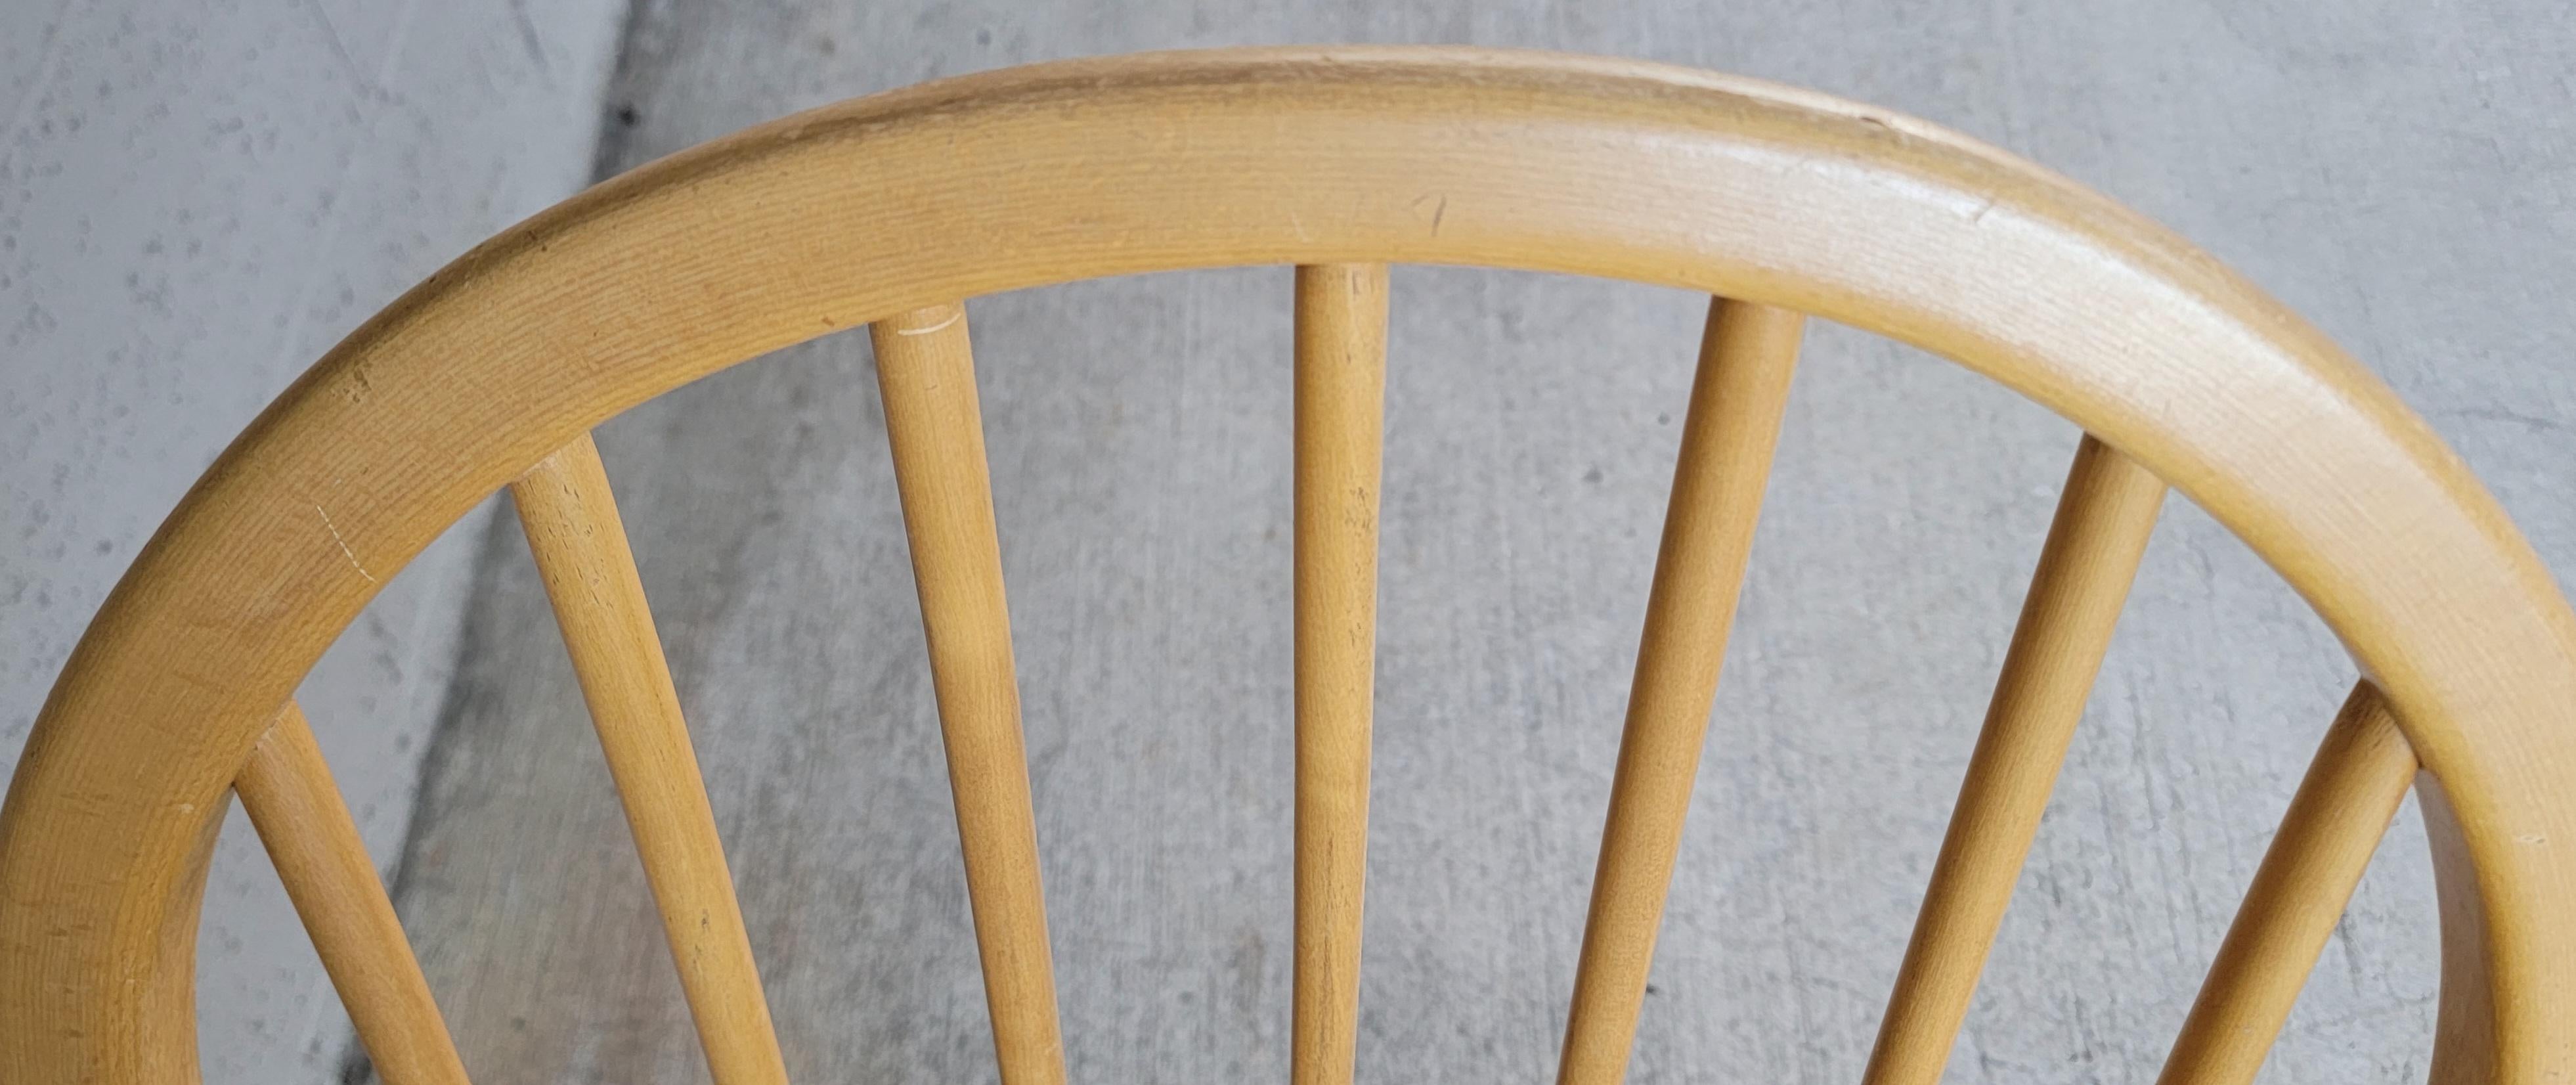 Lucian Ercolani for Ercol, Beech Wood Hoop Back Lounge Chair. 1960's For Sale 6